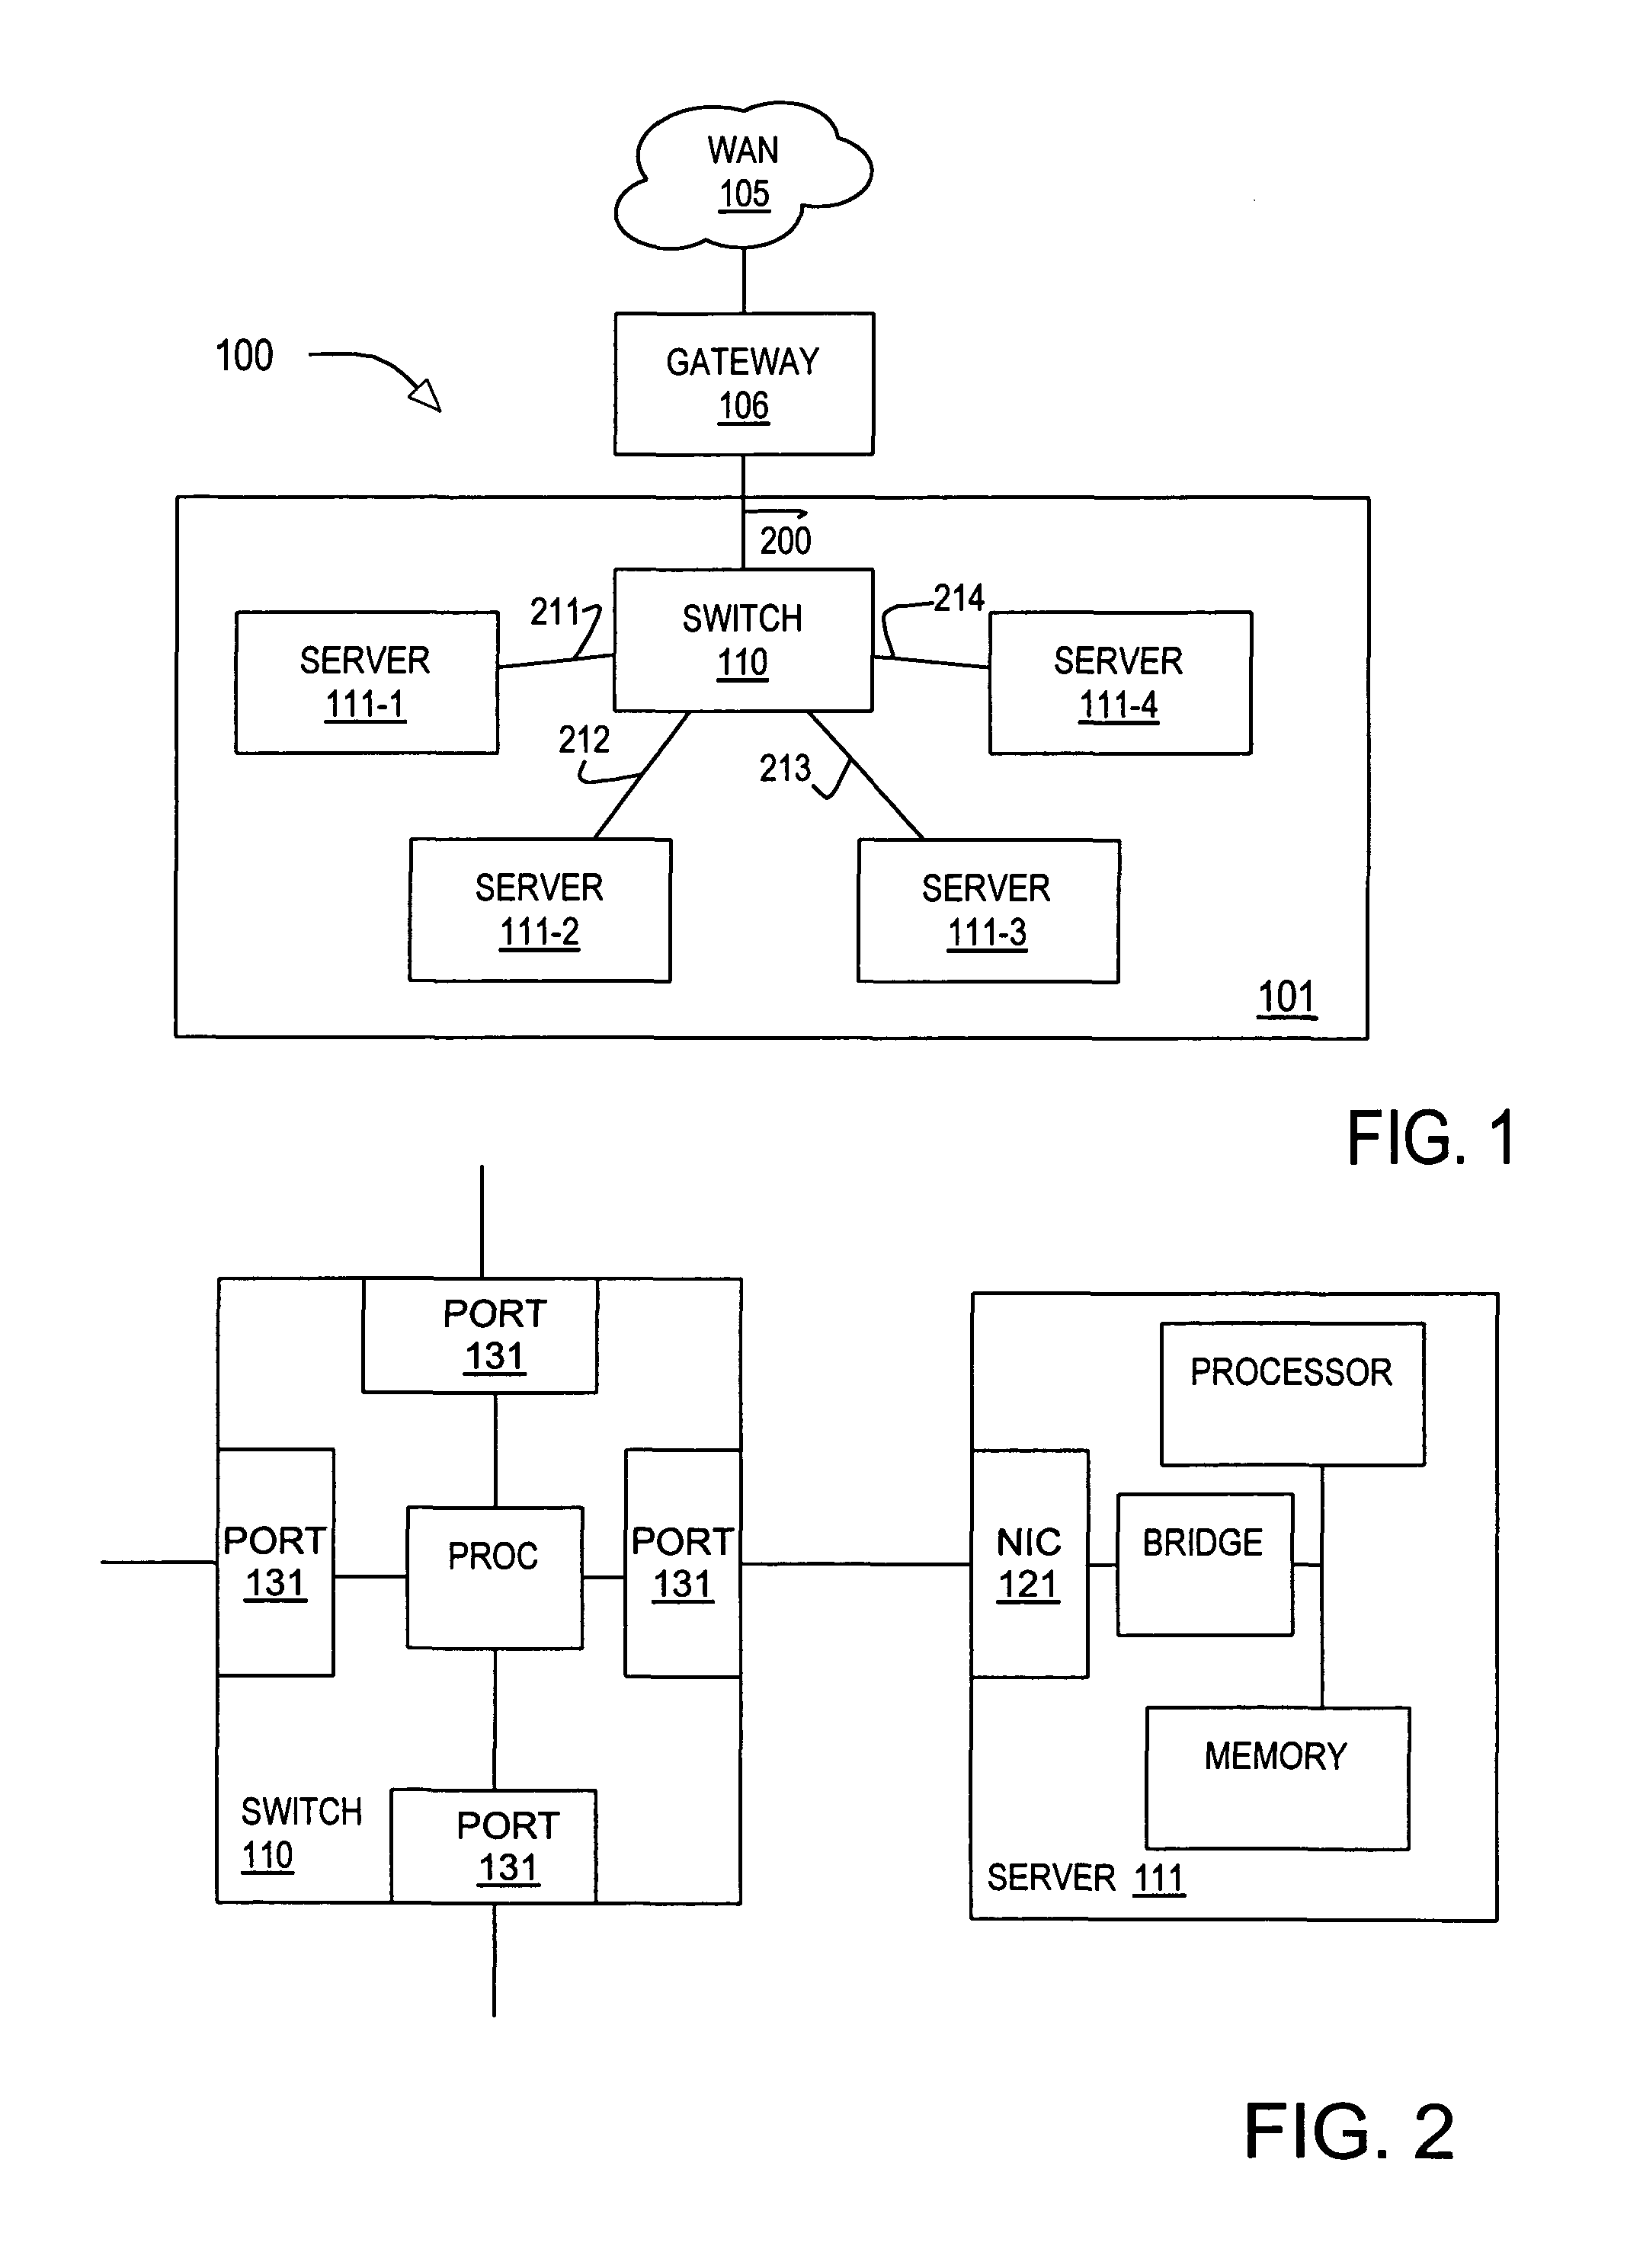 Conserving energy in a data processing network